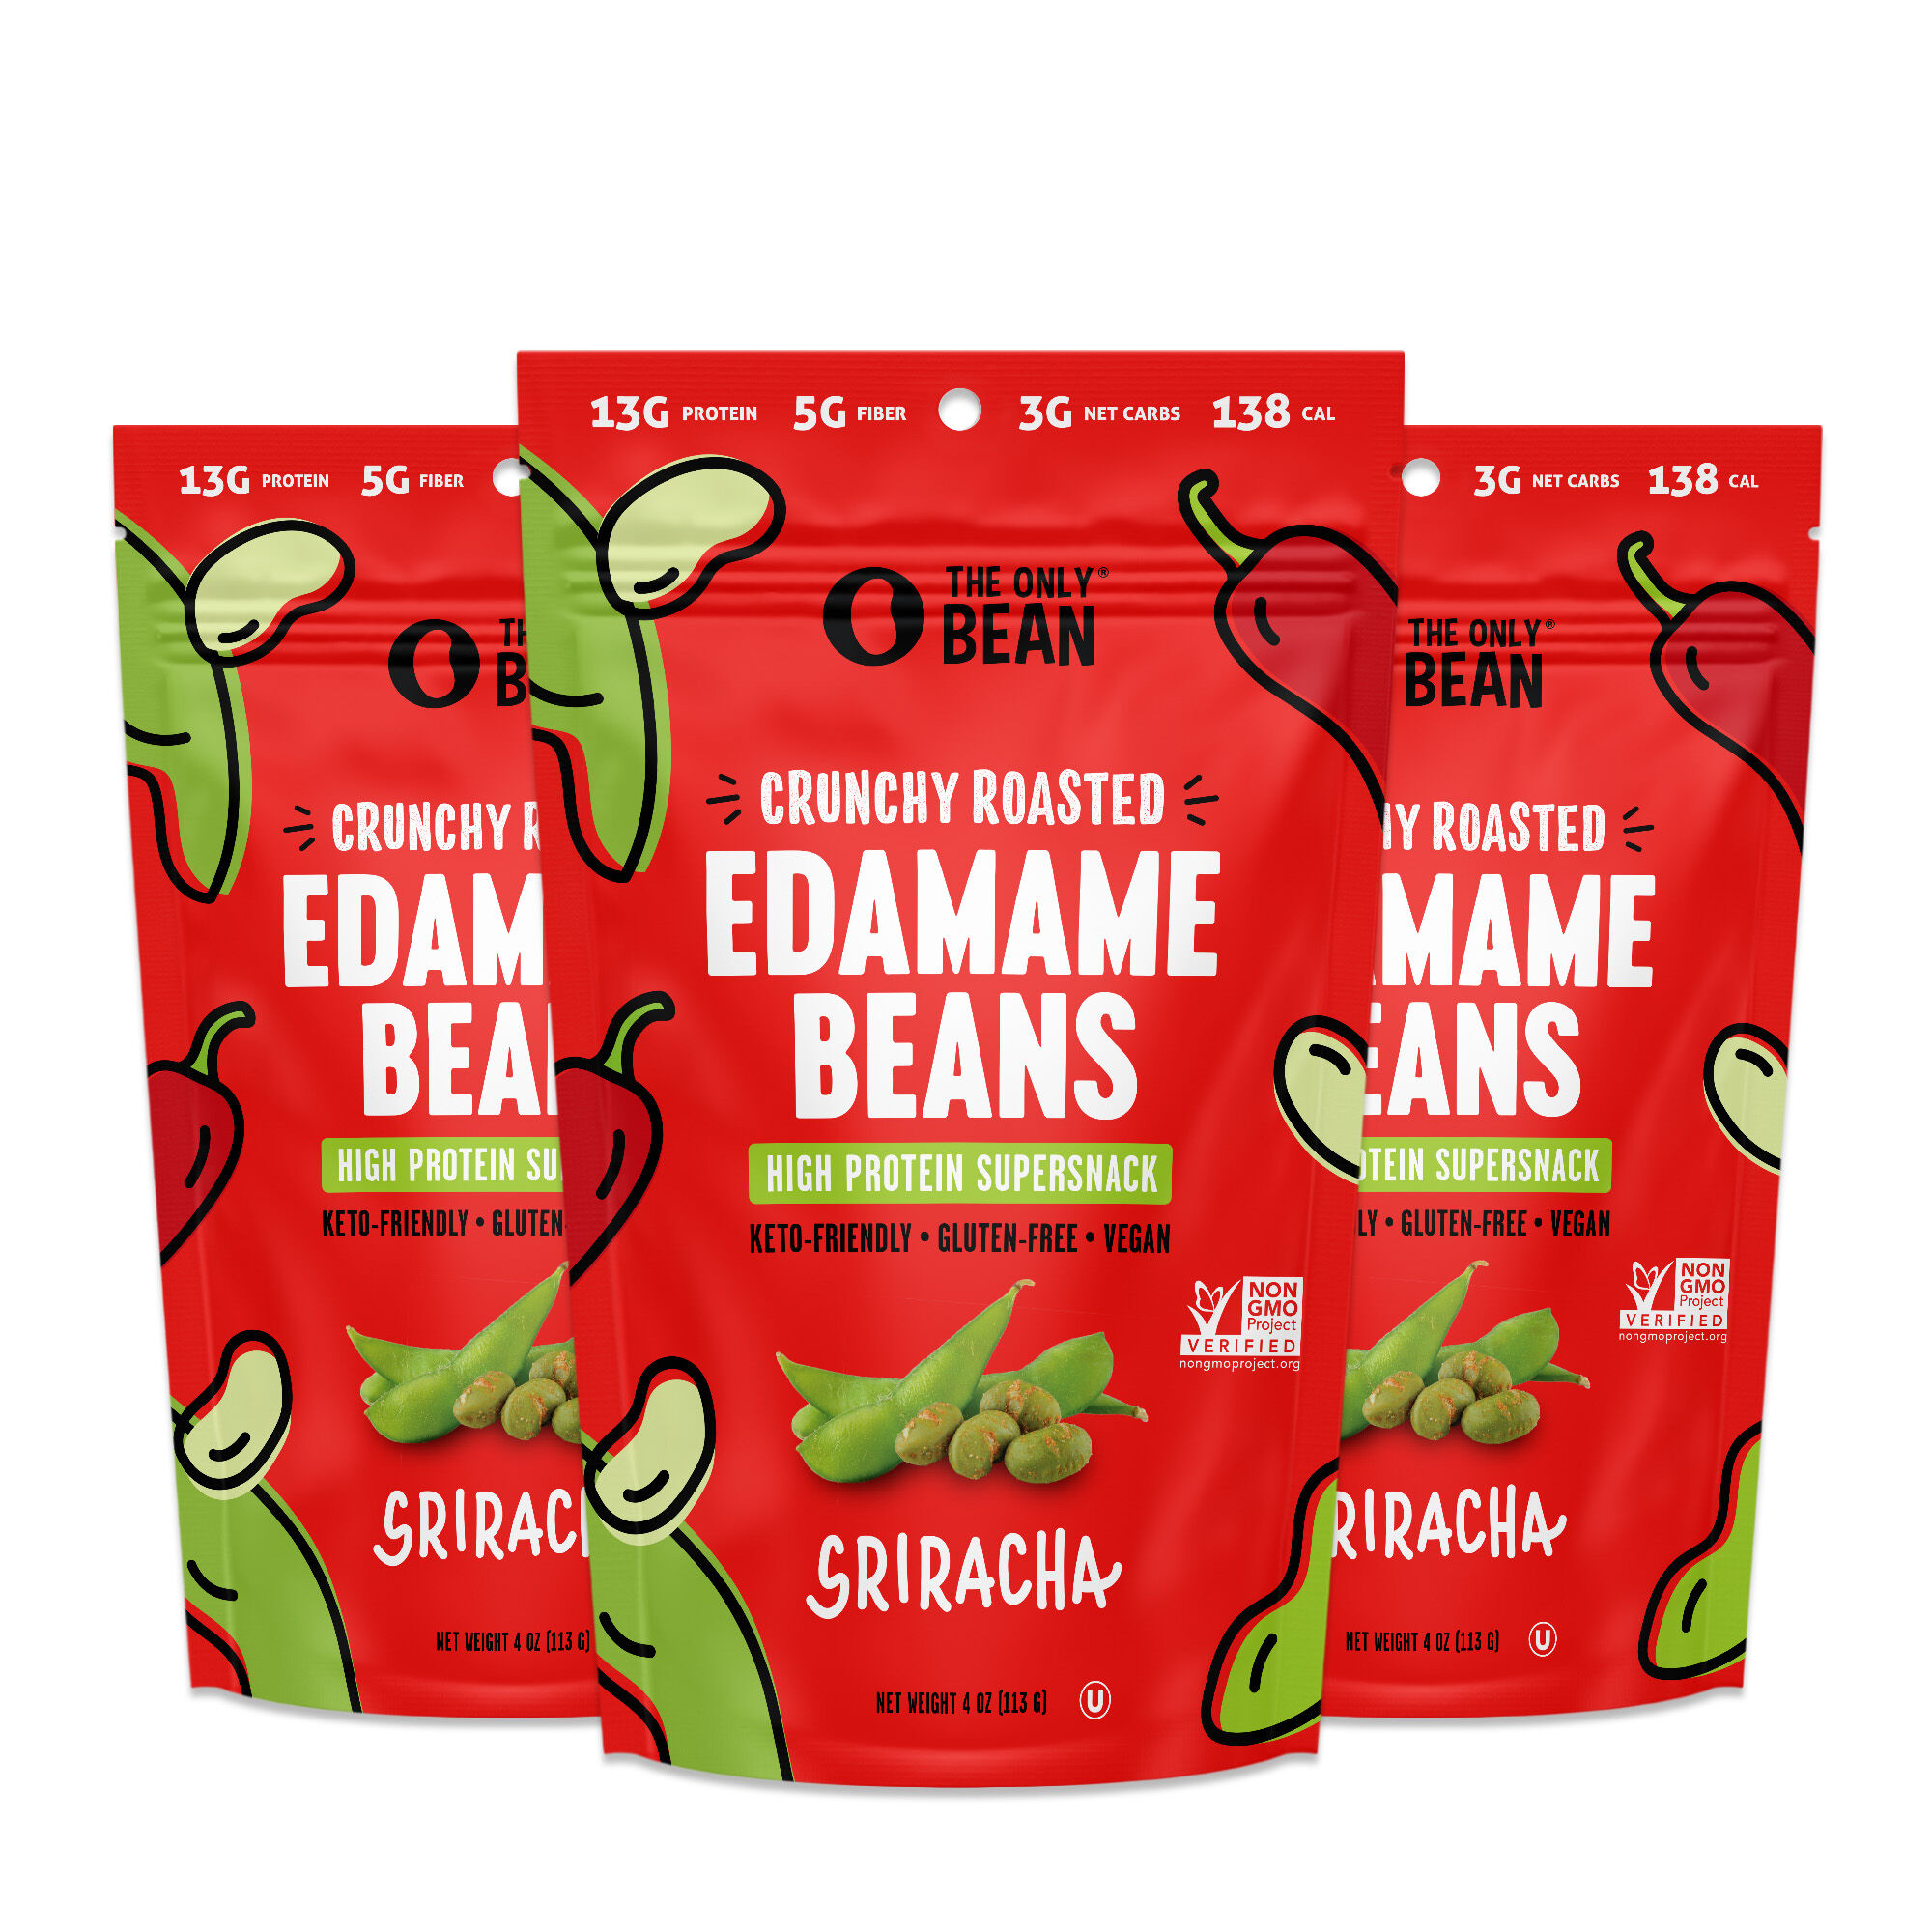 The Only Bean - Crunchy Roasted Edamame Beans - Variety Pack - 24 